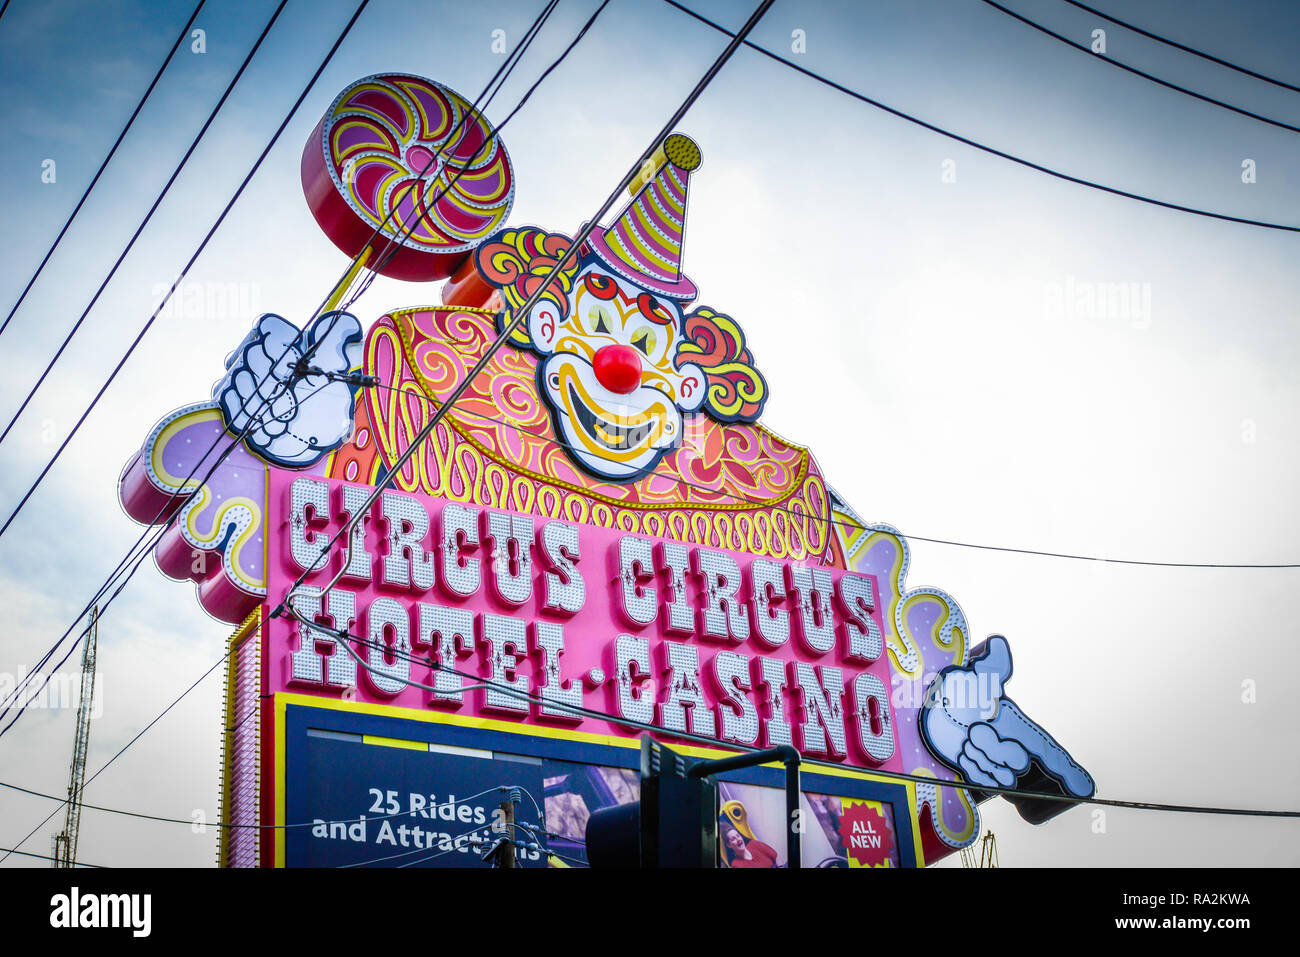 Neon sign in daytime of the Circus Circus Hotel and Casino, in Las Vegas, NV with it's outdoor Clown sign surrounded by electrical lines overhead Stock Photo